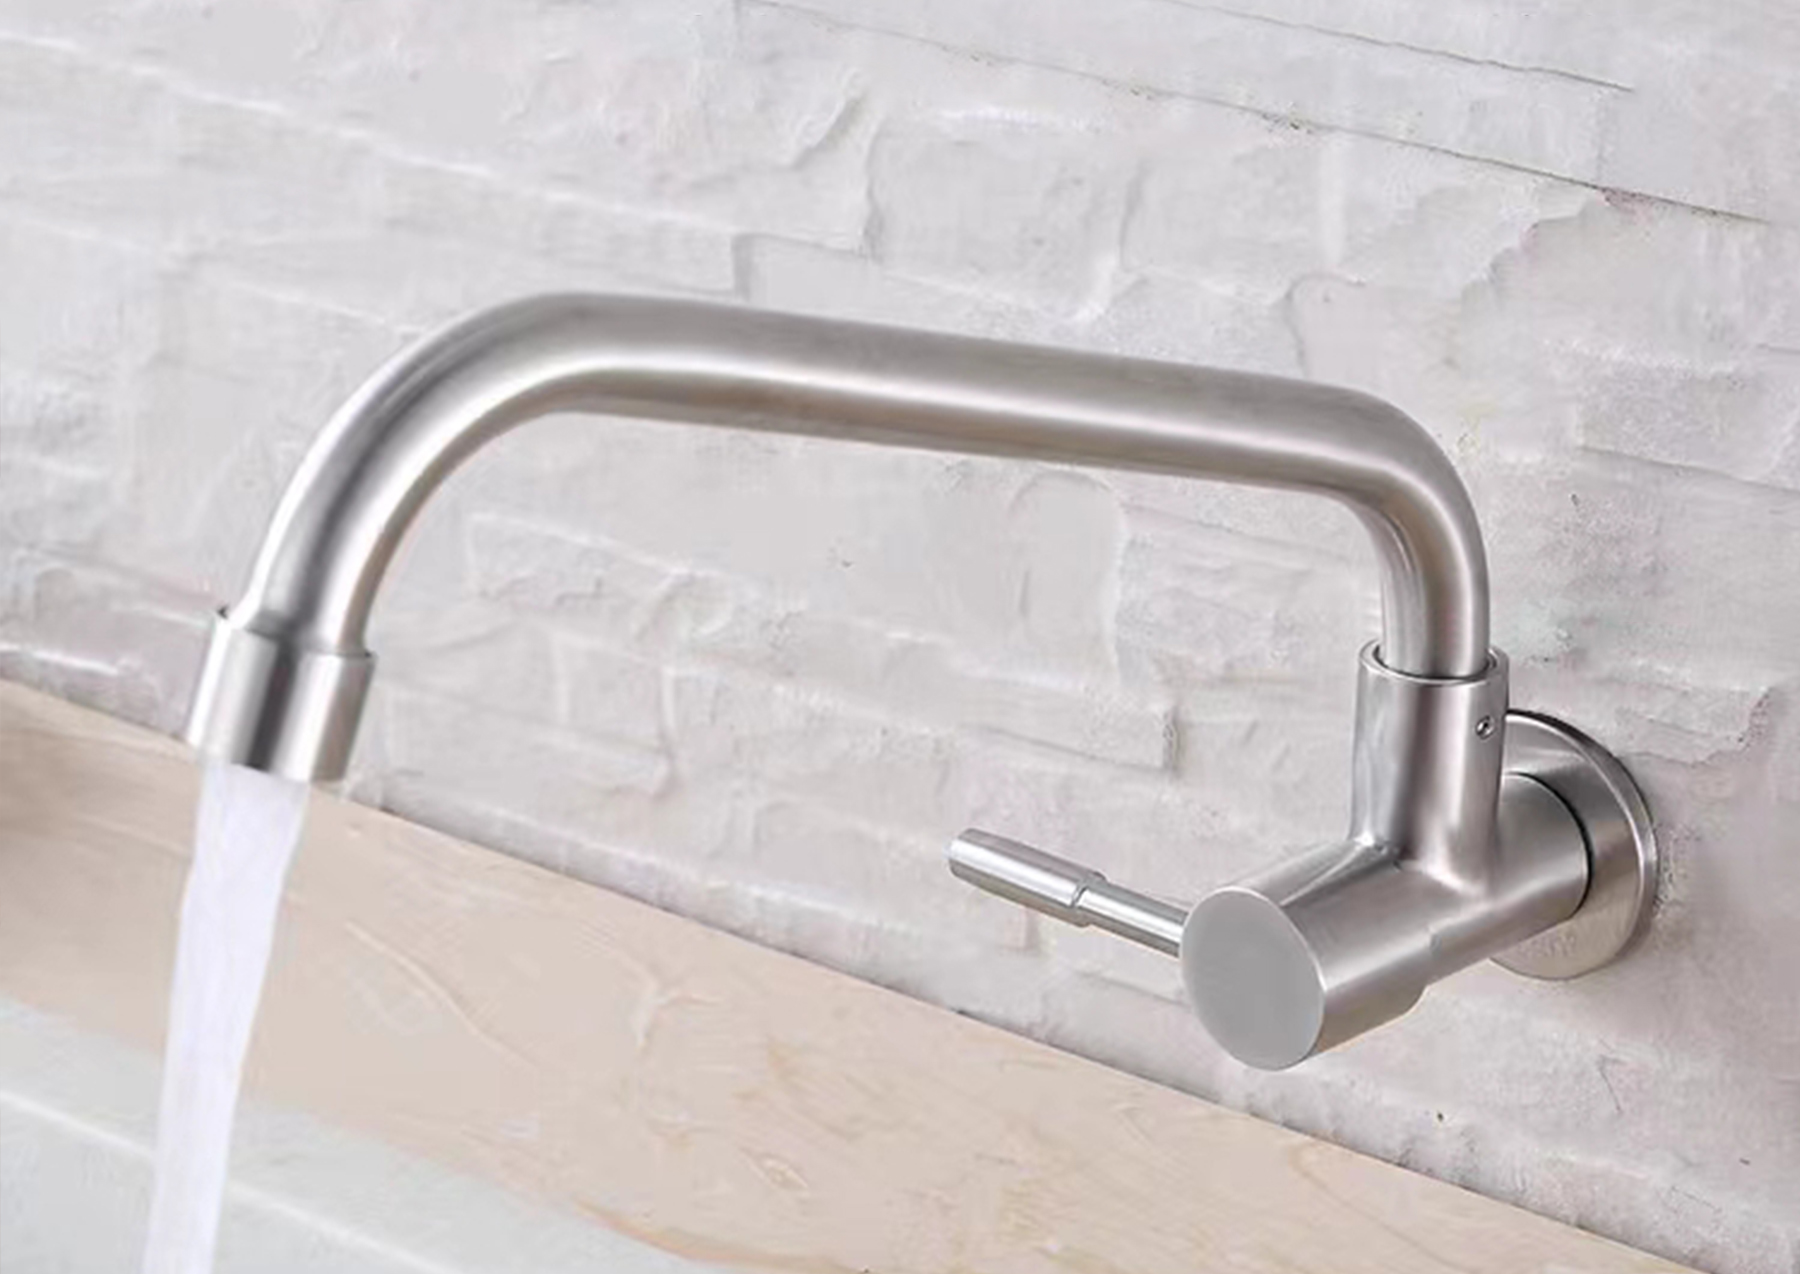 Wall-mounted stainless steel vegetable basin faucet